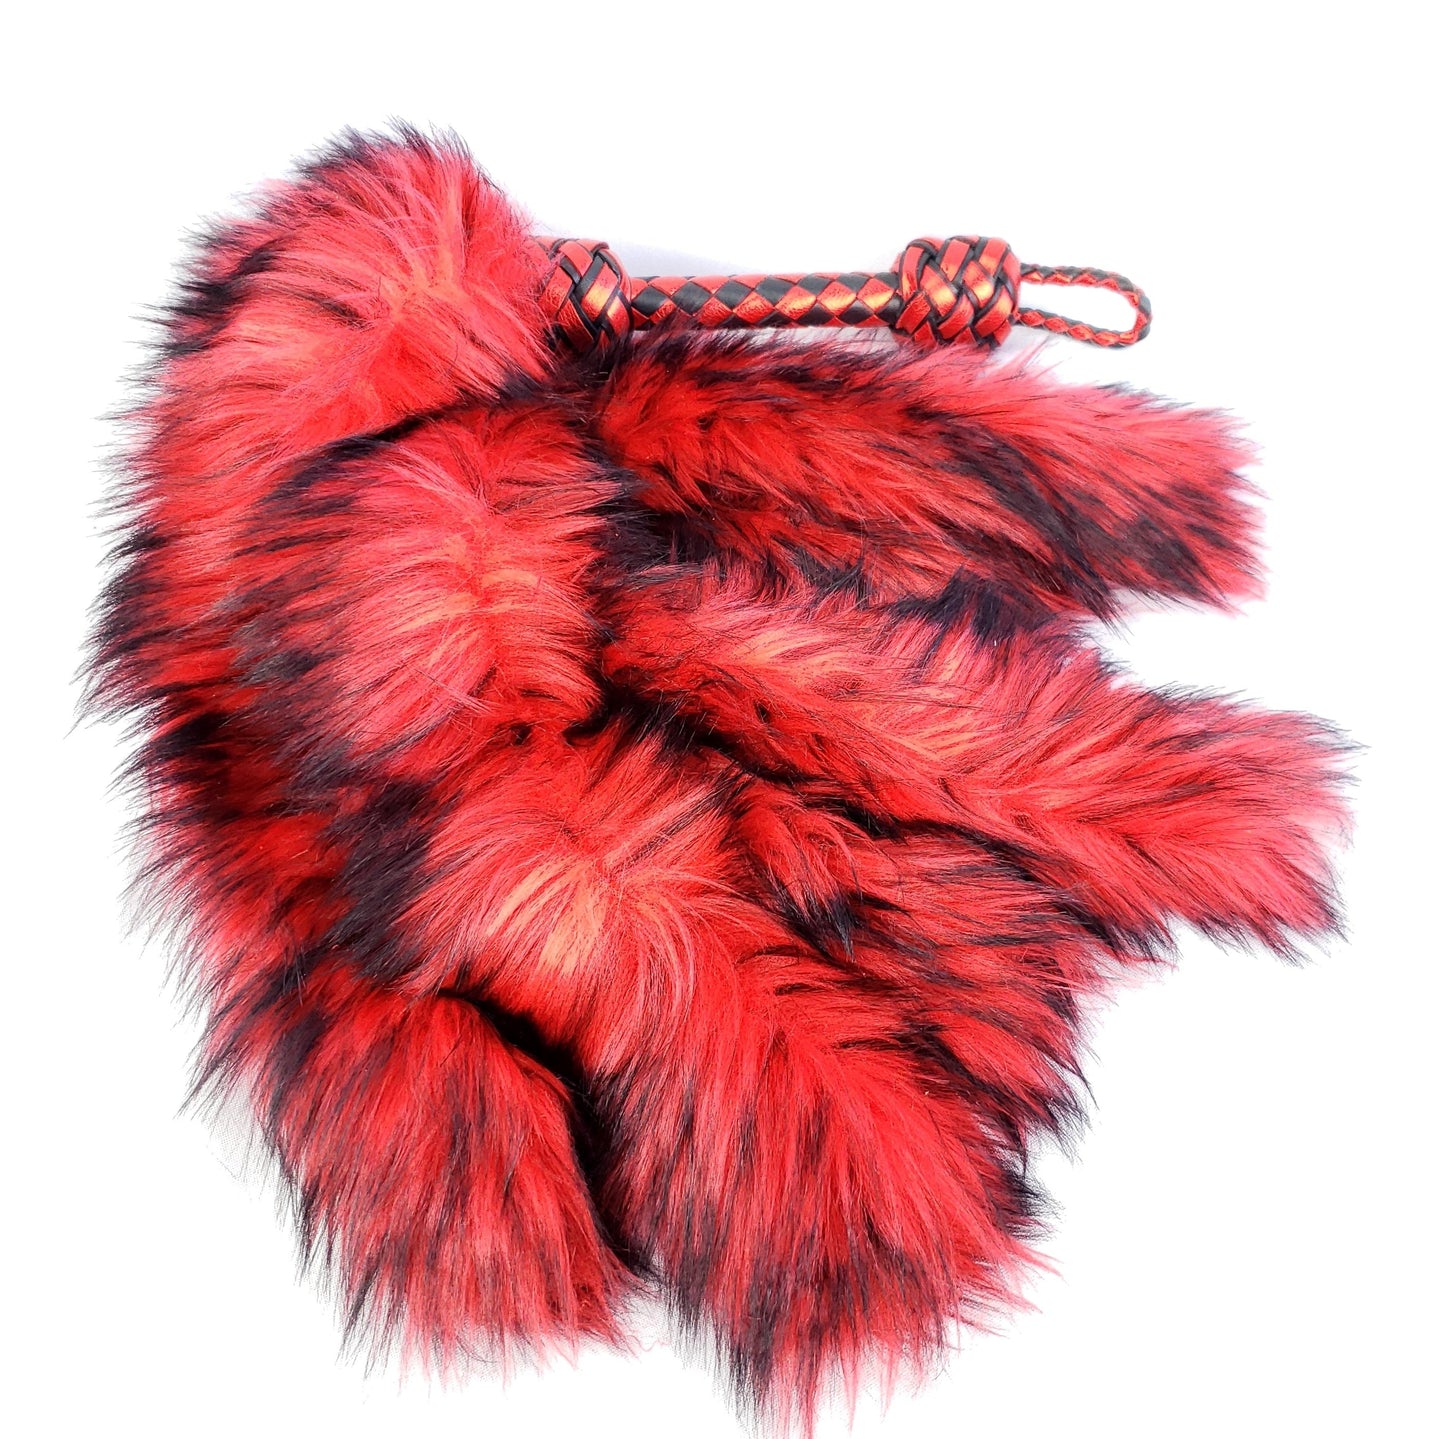 Red and Black Fluffinator flogger- In Stock